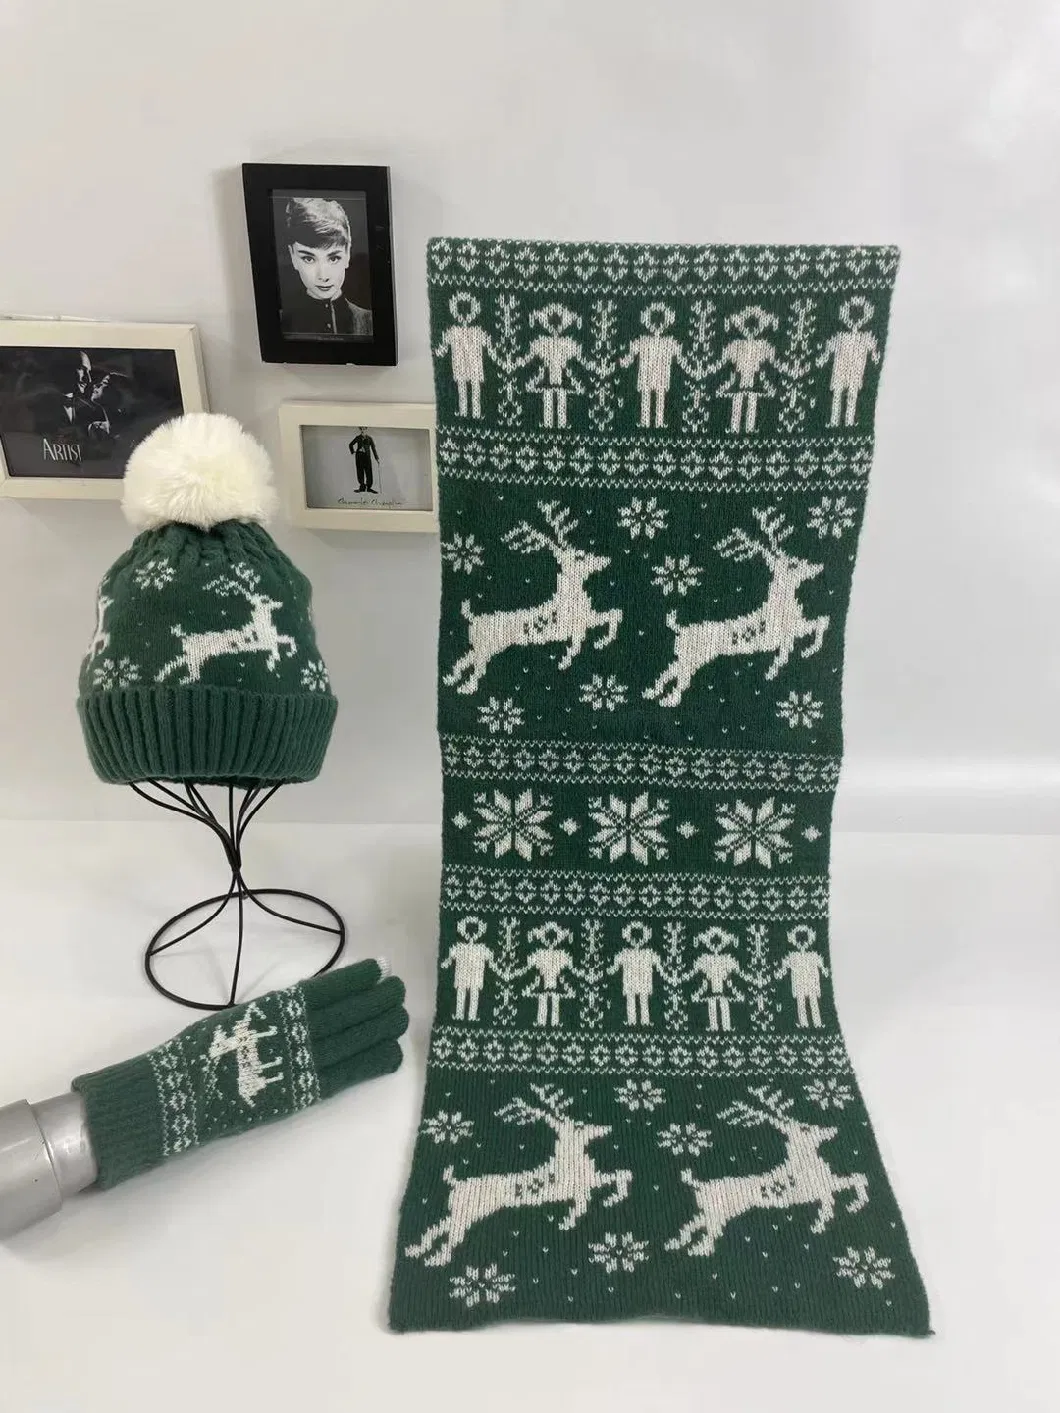 Winter Women Knit Christmas Scarf, Hat and Gloves Thick Warm Set for Students